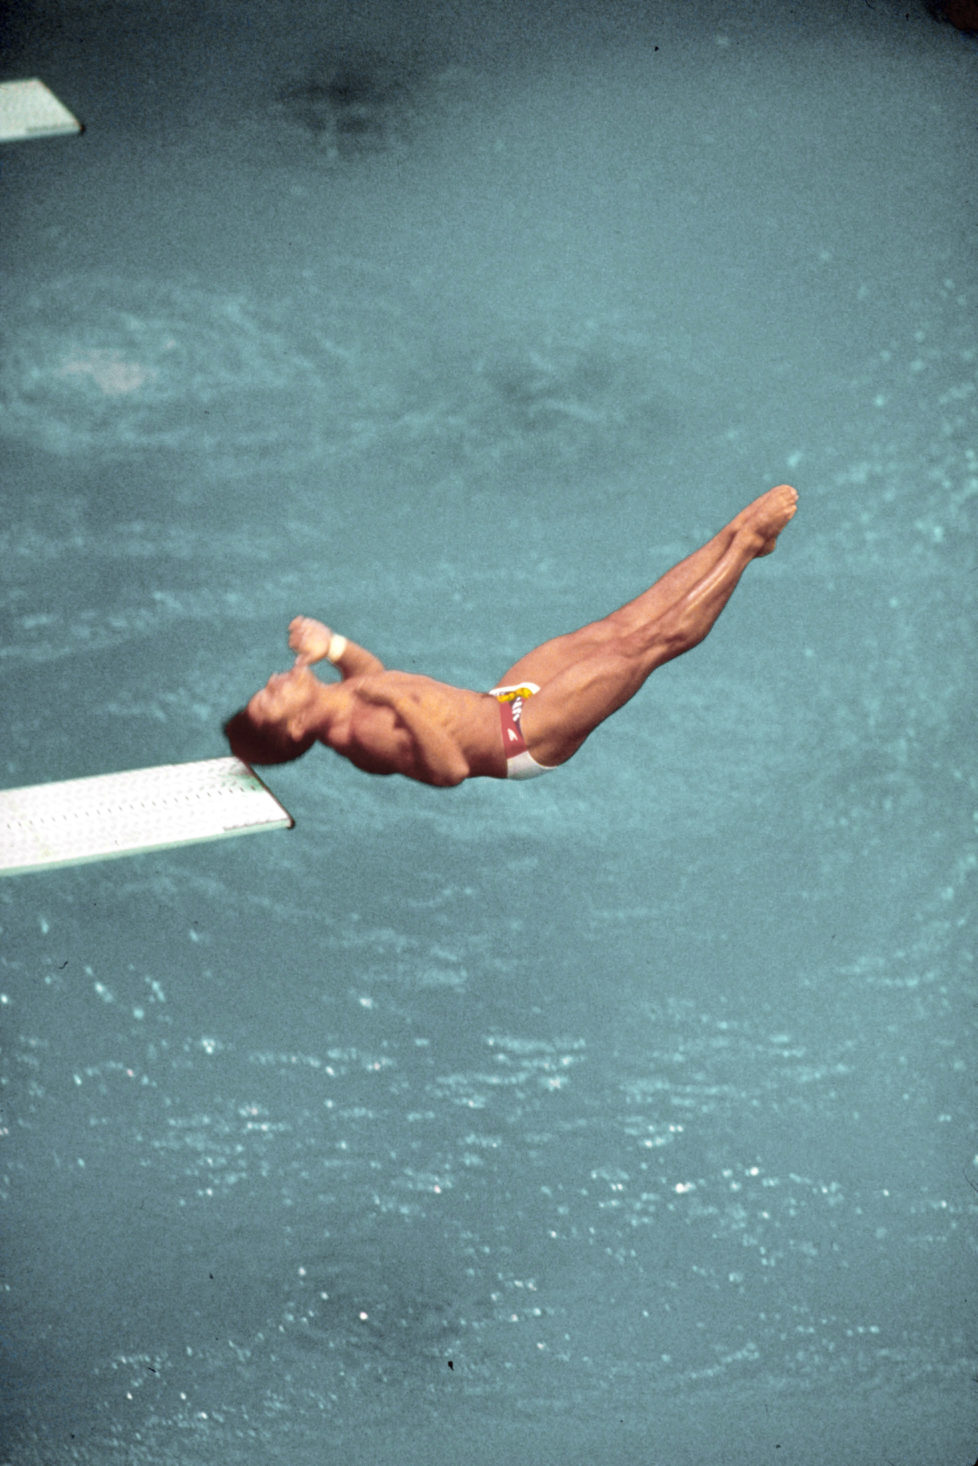 US diver Greg Louganis making dive during which he hit his head on the board while competing in Olympics. (Photo by Rich Clarkson/The LIFE Images Collection/Getty Images)